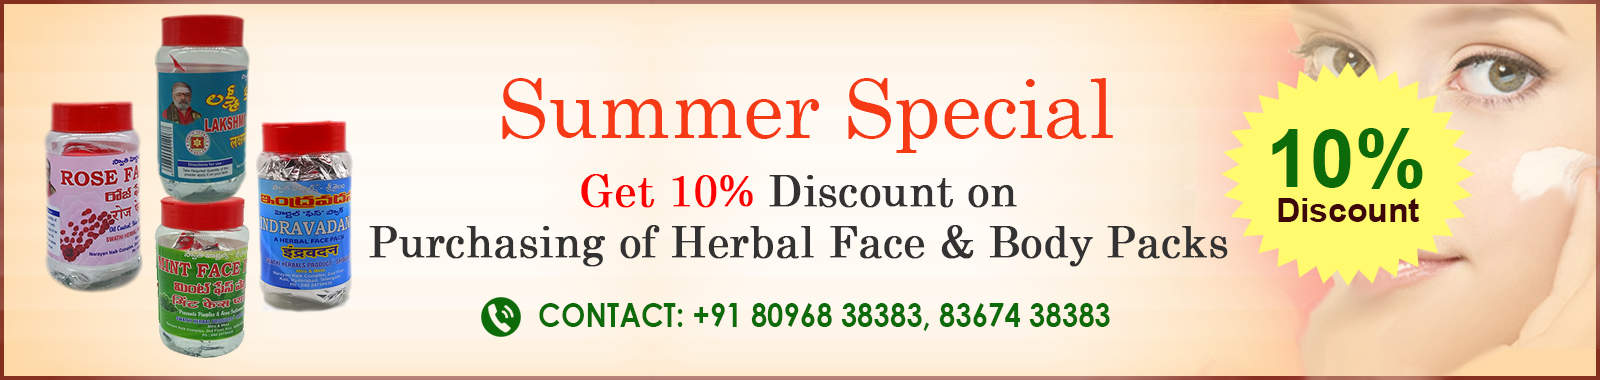 Summer special discount on purchasing of Herbal Faces & body packs